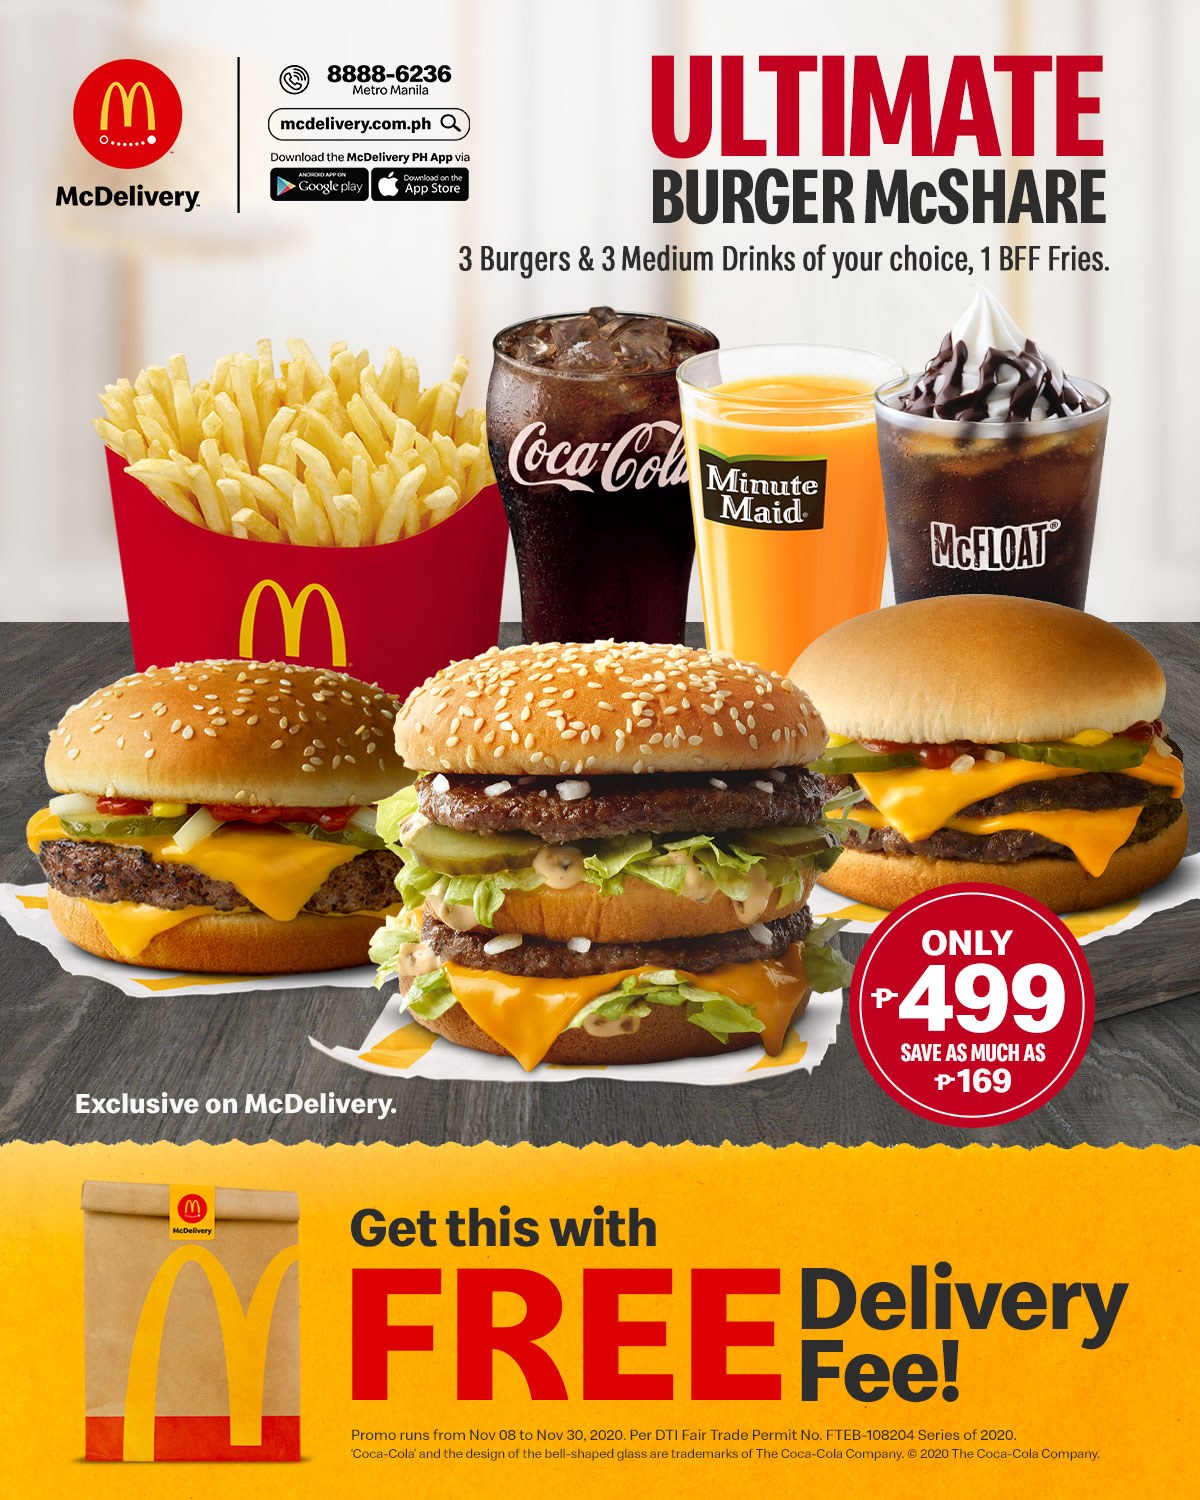 Enjoy FREE DELIVERY When You Order McDonald's Ultimate Burger McShare